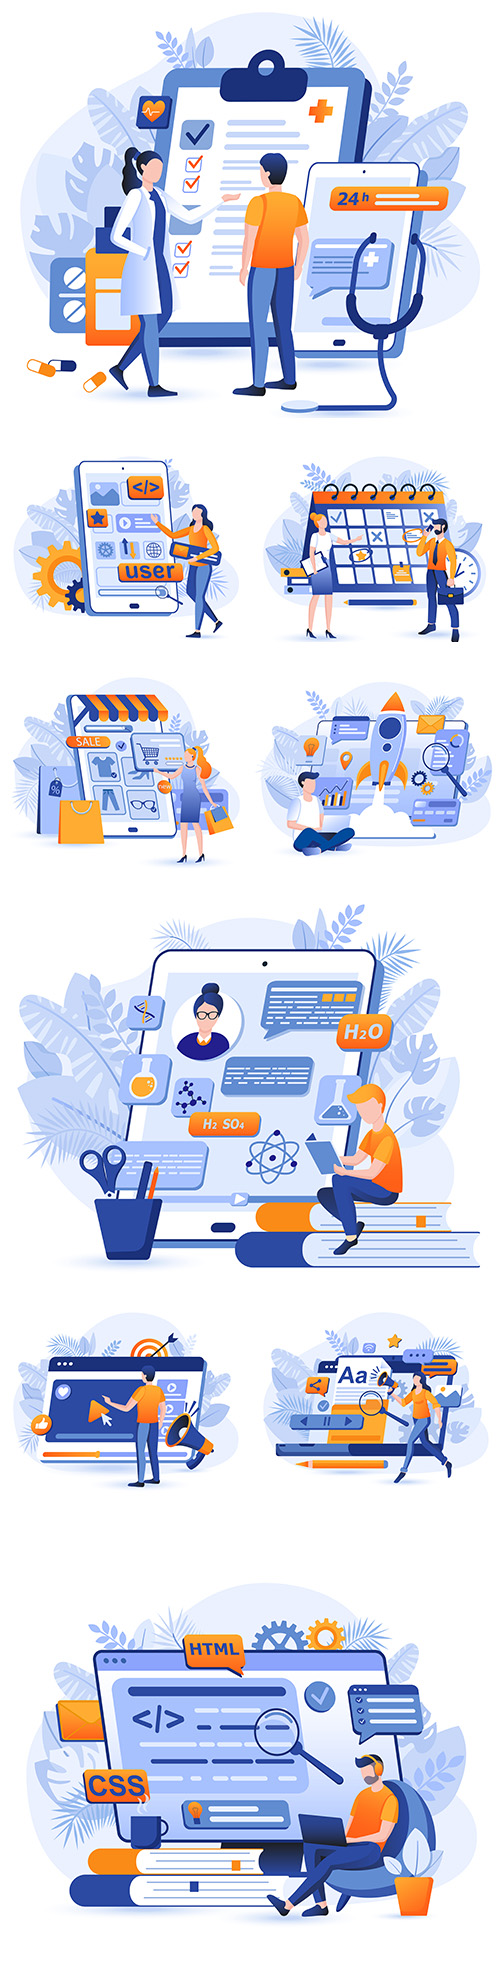 Business planning and online store flat design illustration concept
